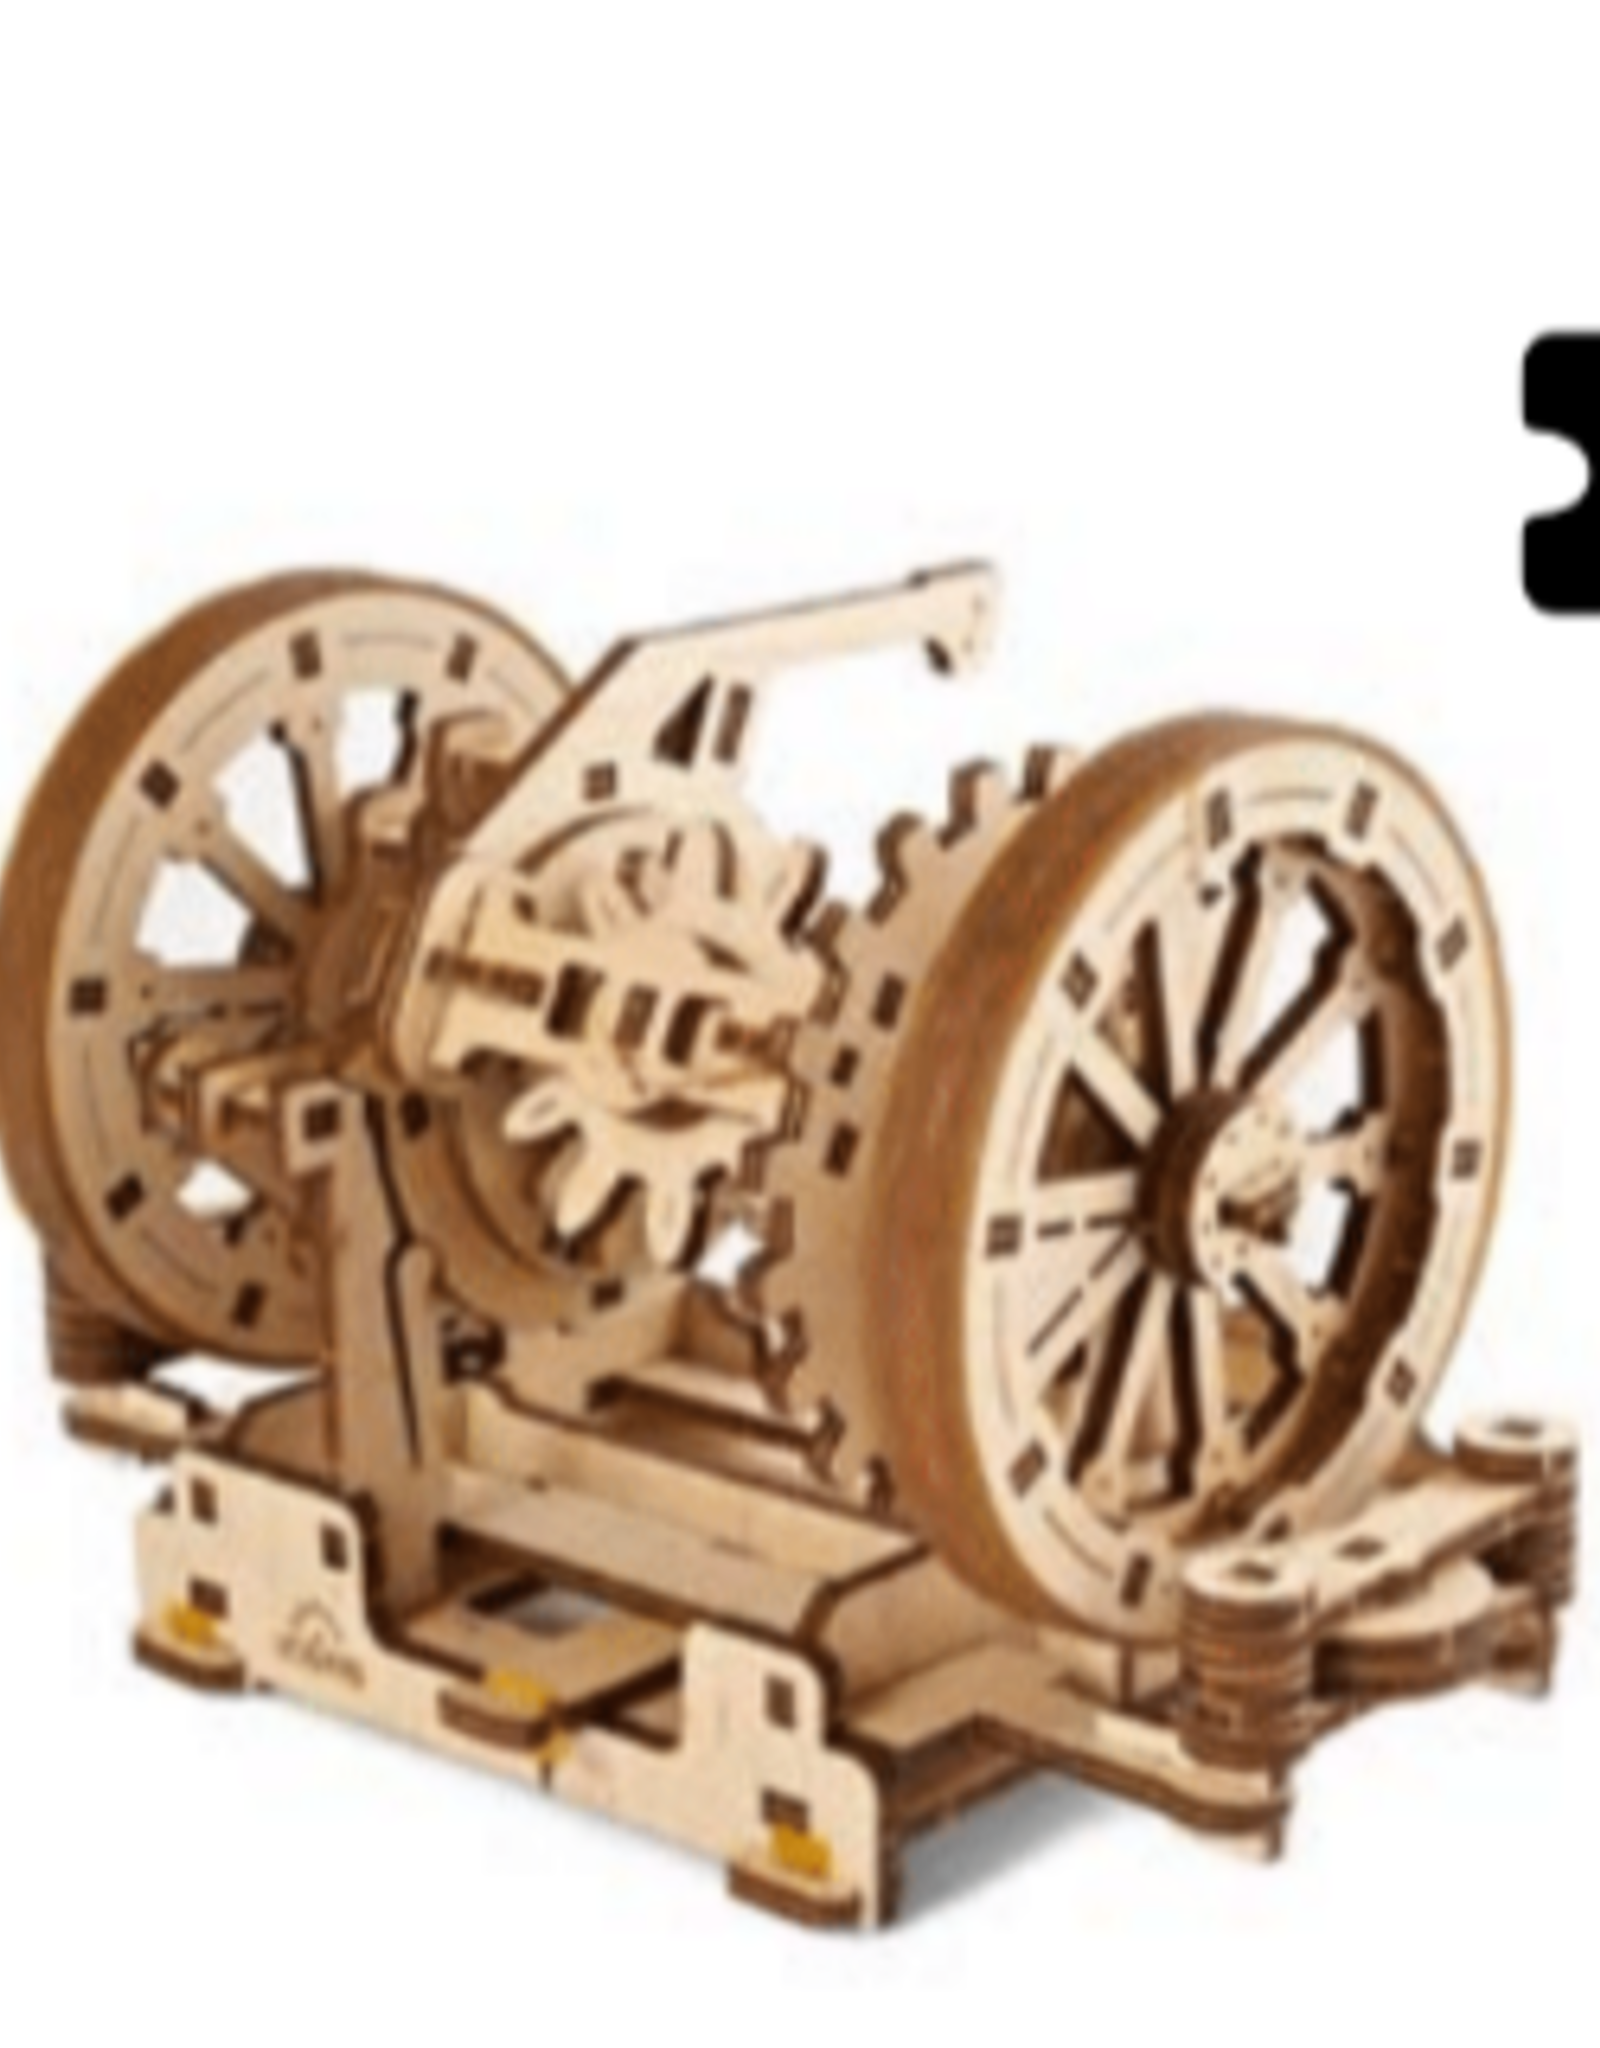 UGEARS-UKIDS DIFFERENTIAL